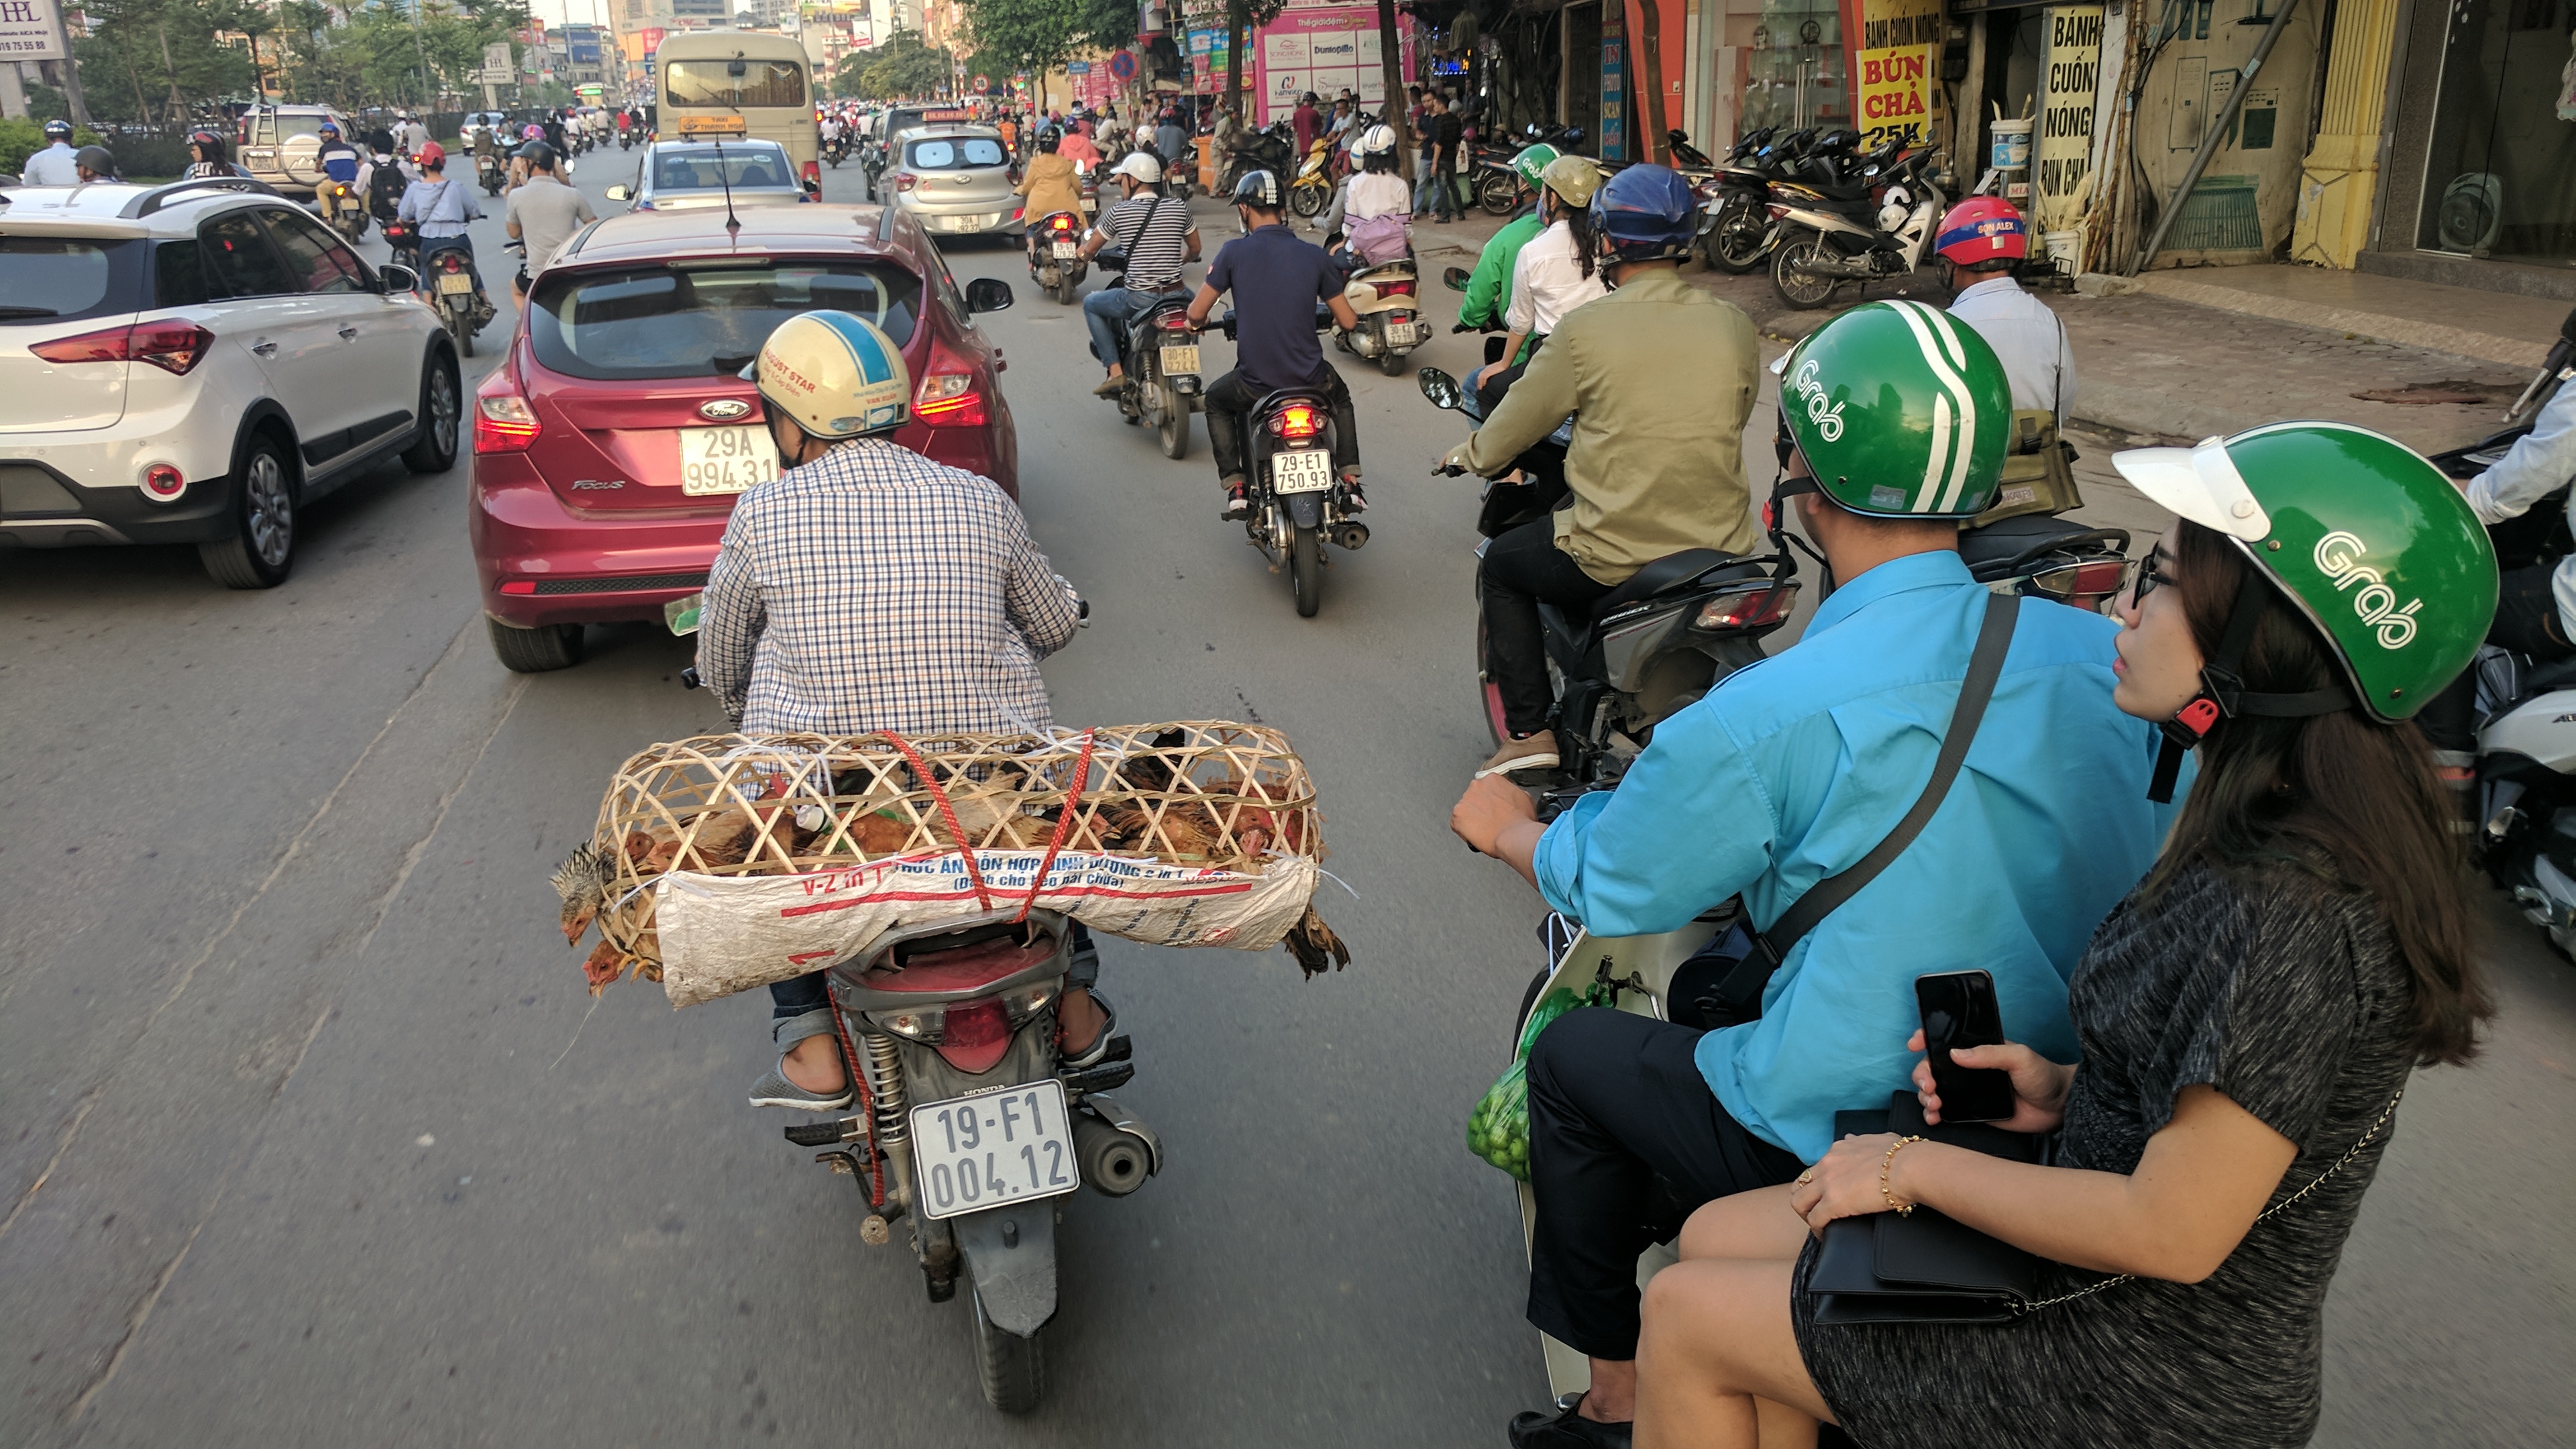 Basket of chickens on the back of a motorbike in Hanoi, Vietnam.